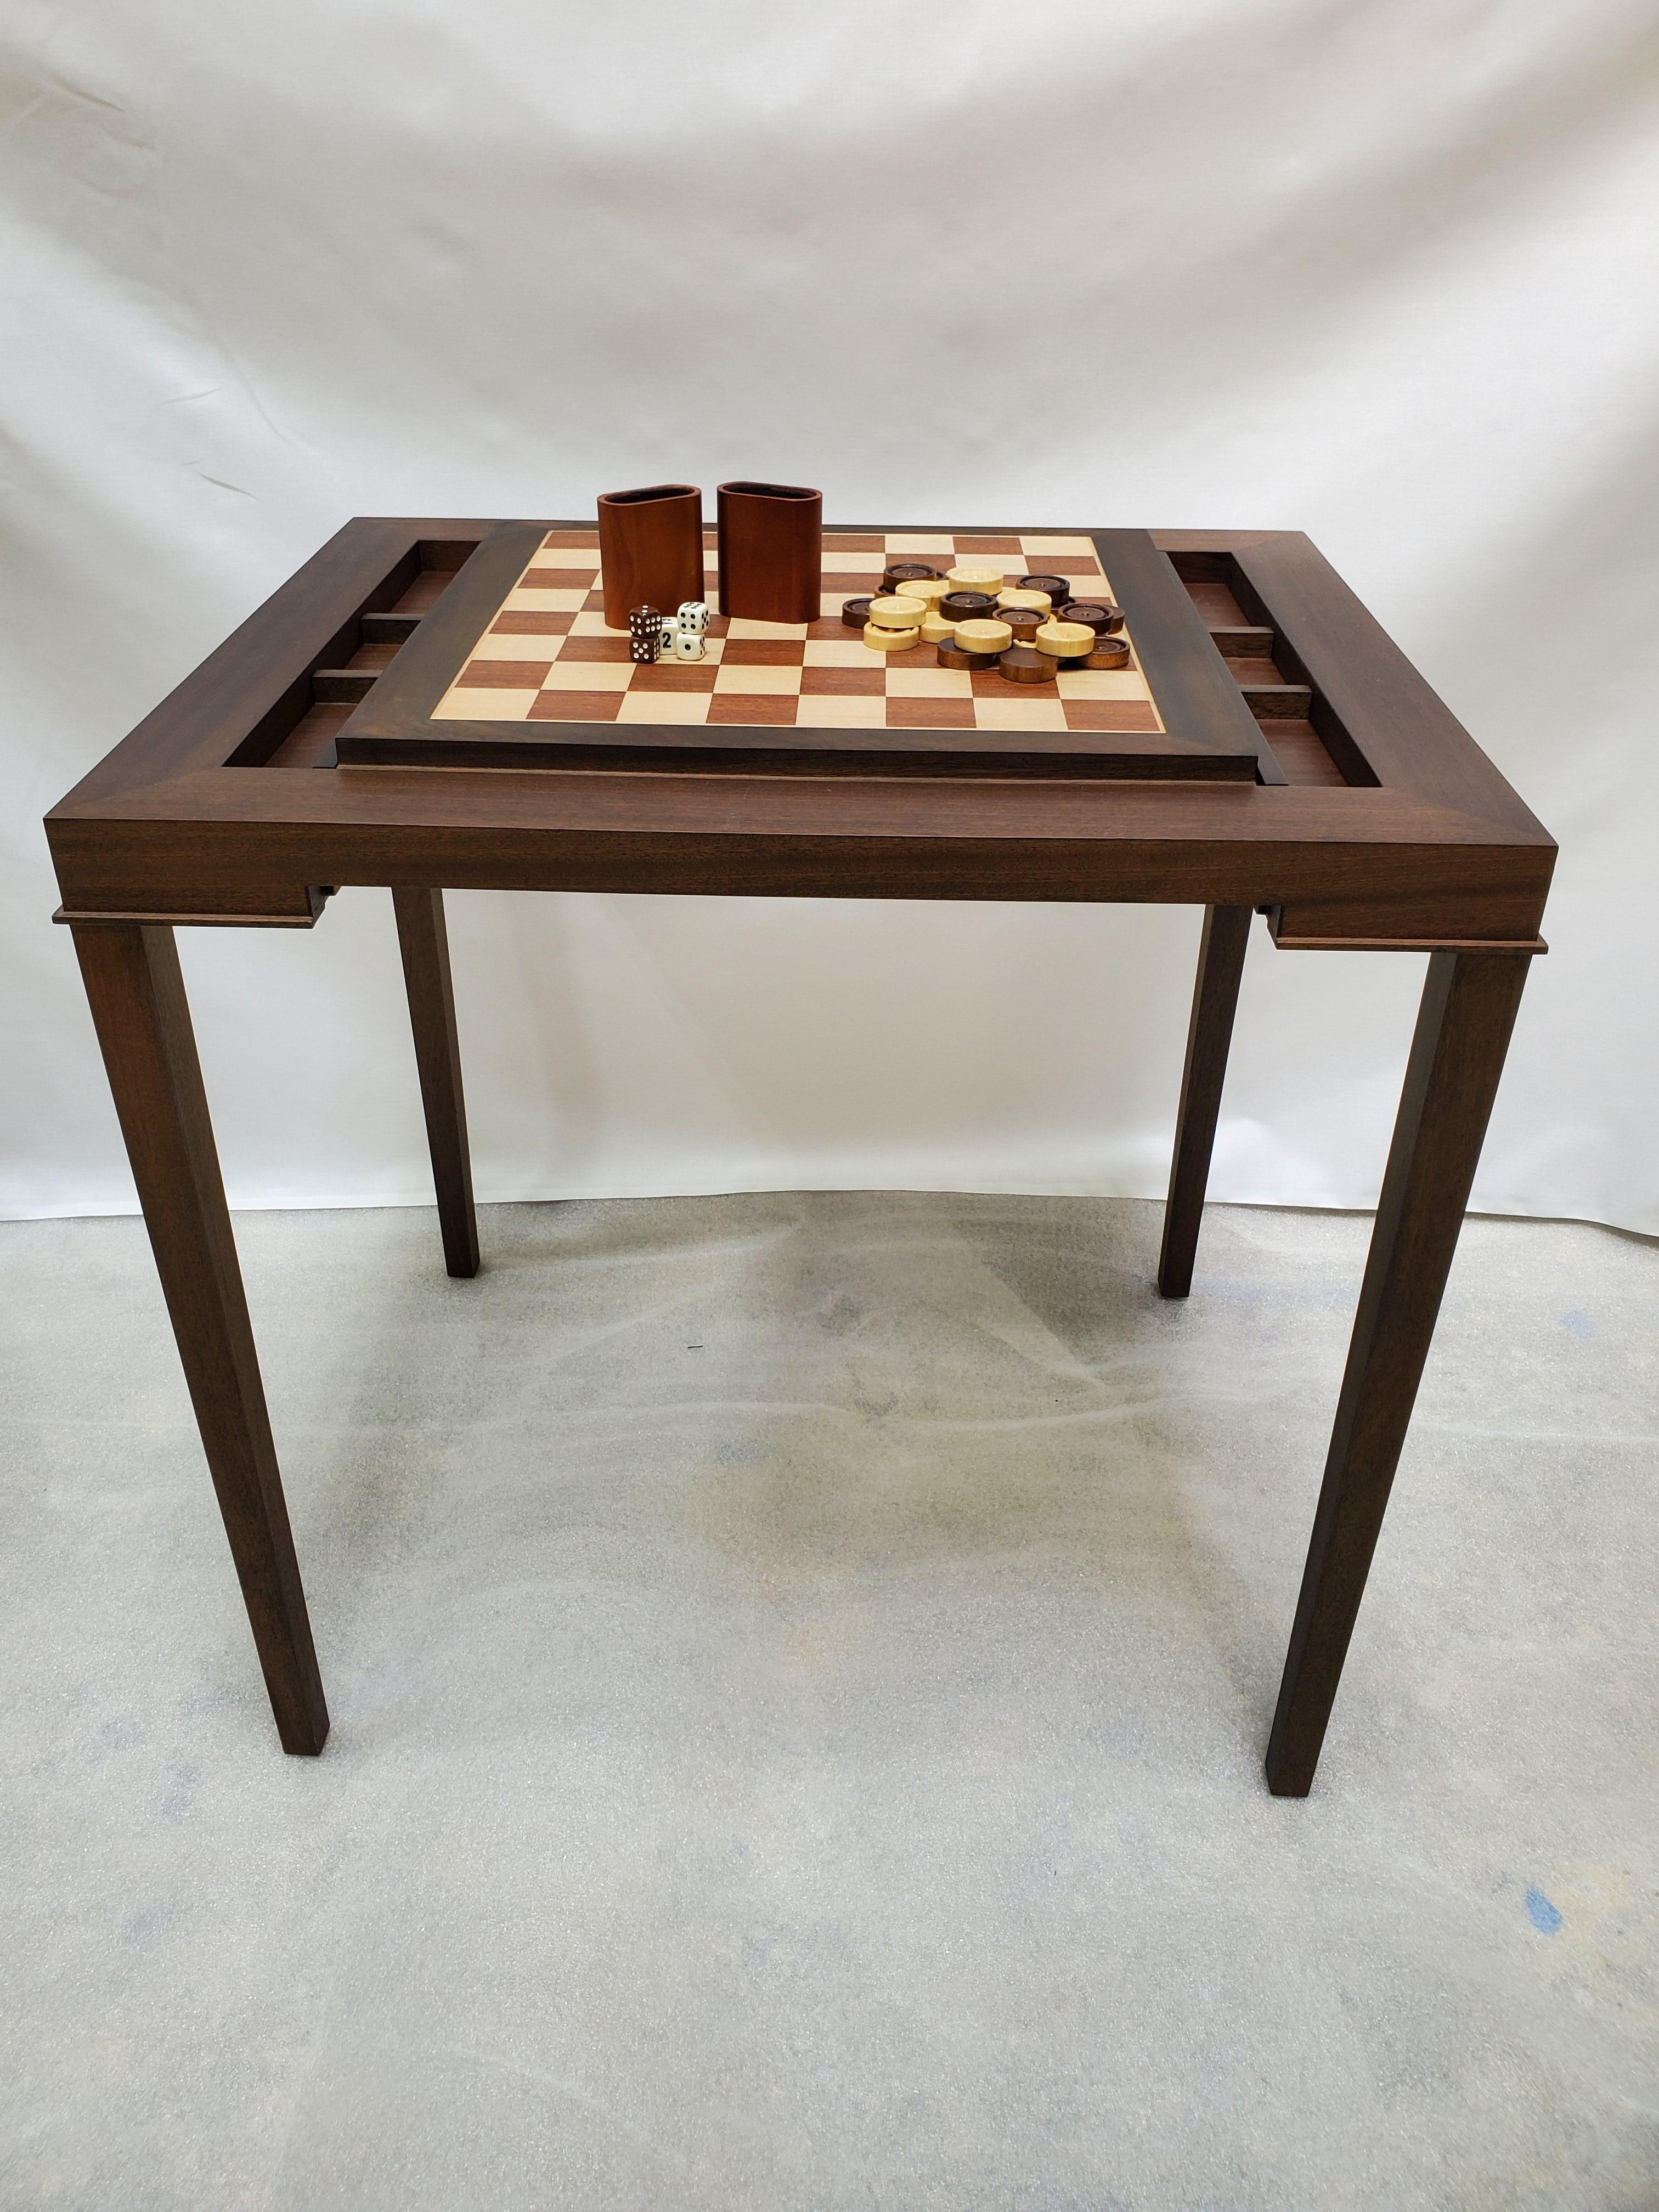 Custom walnut and mahogany backgammon table that converts to chess with a slide out board.

New production. Made to order in walnut and mahogany. Designed and made in NYC, each table is handcrafted within NYC and has unique attributes. One-day